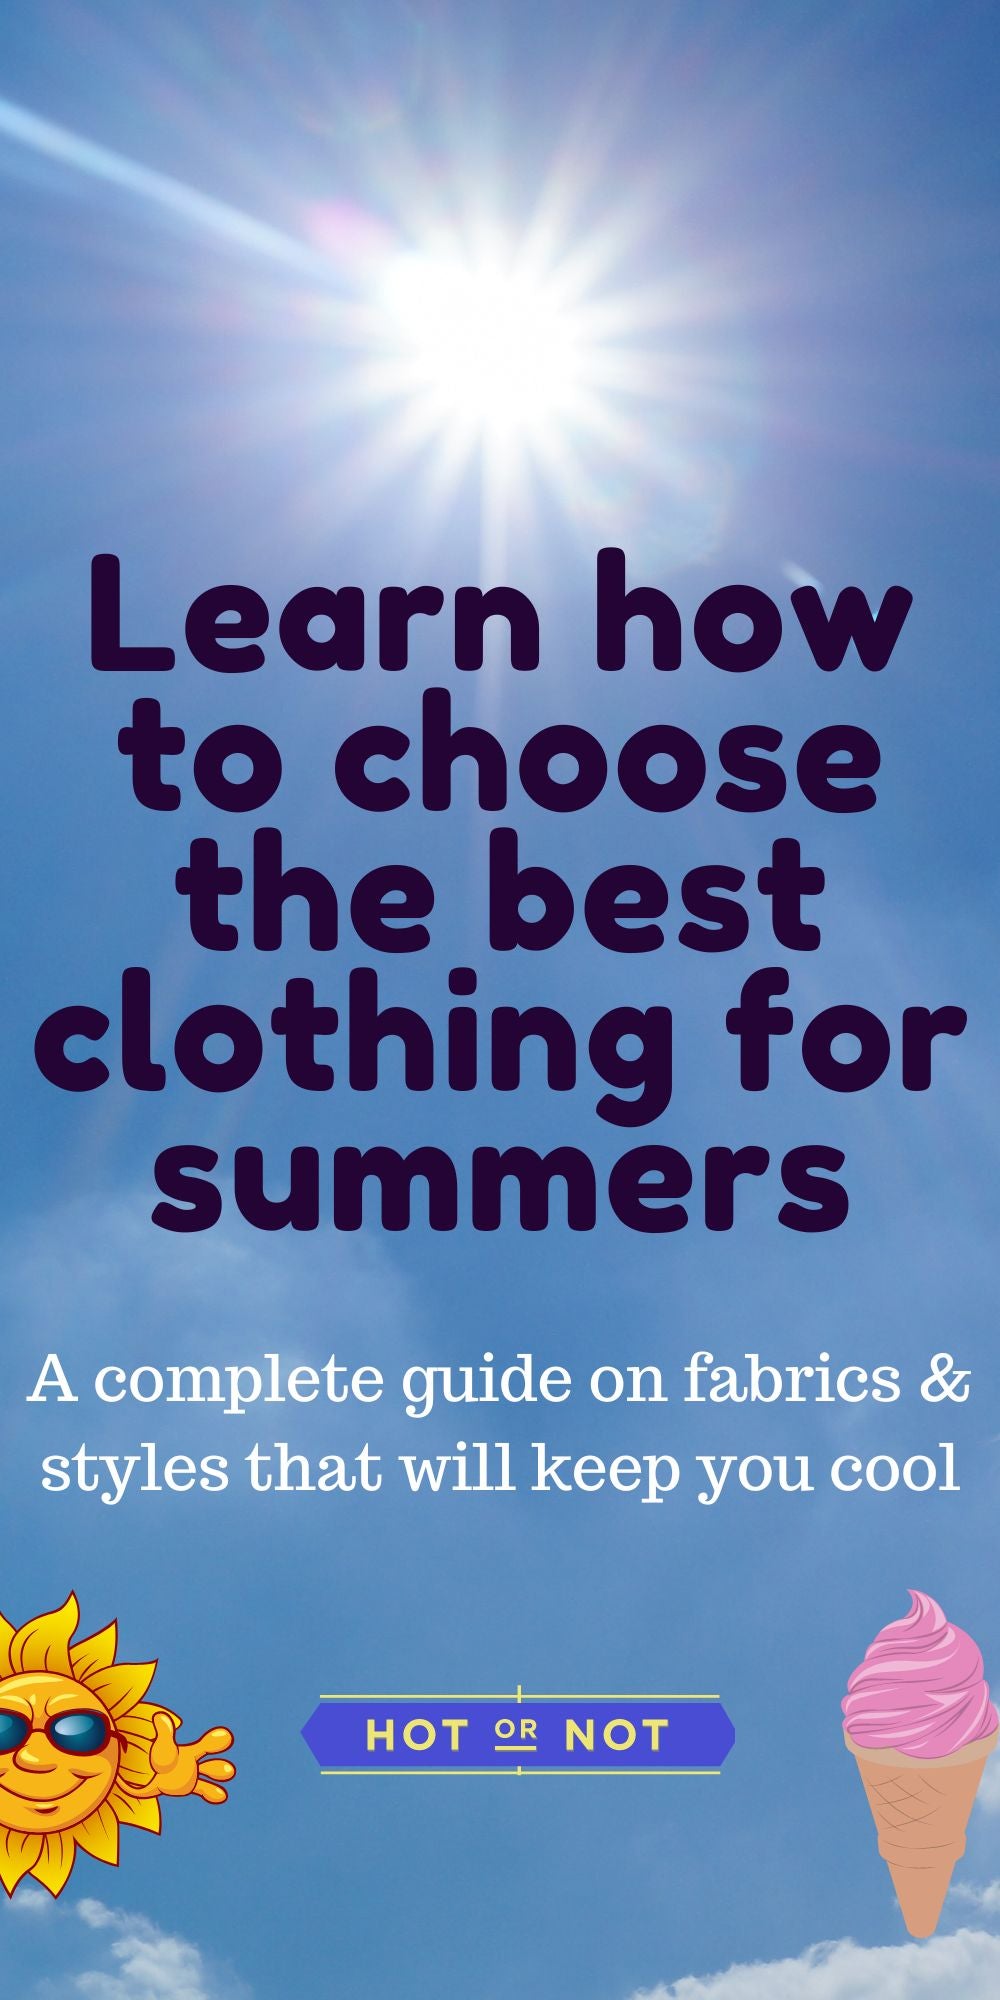 What are the best clothes for summer heat